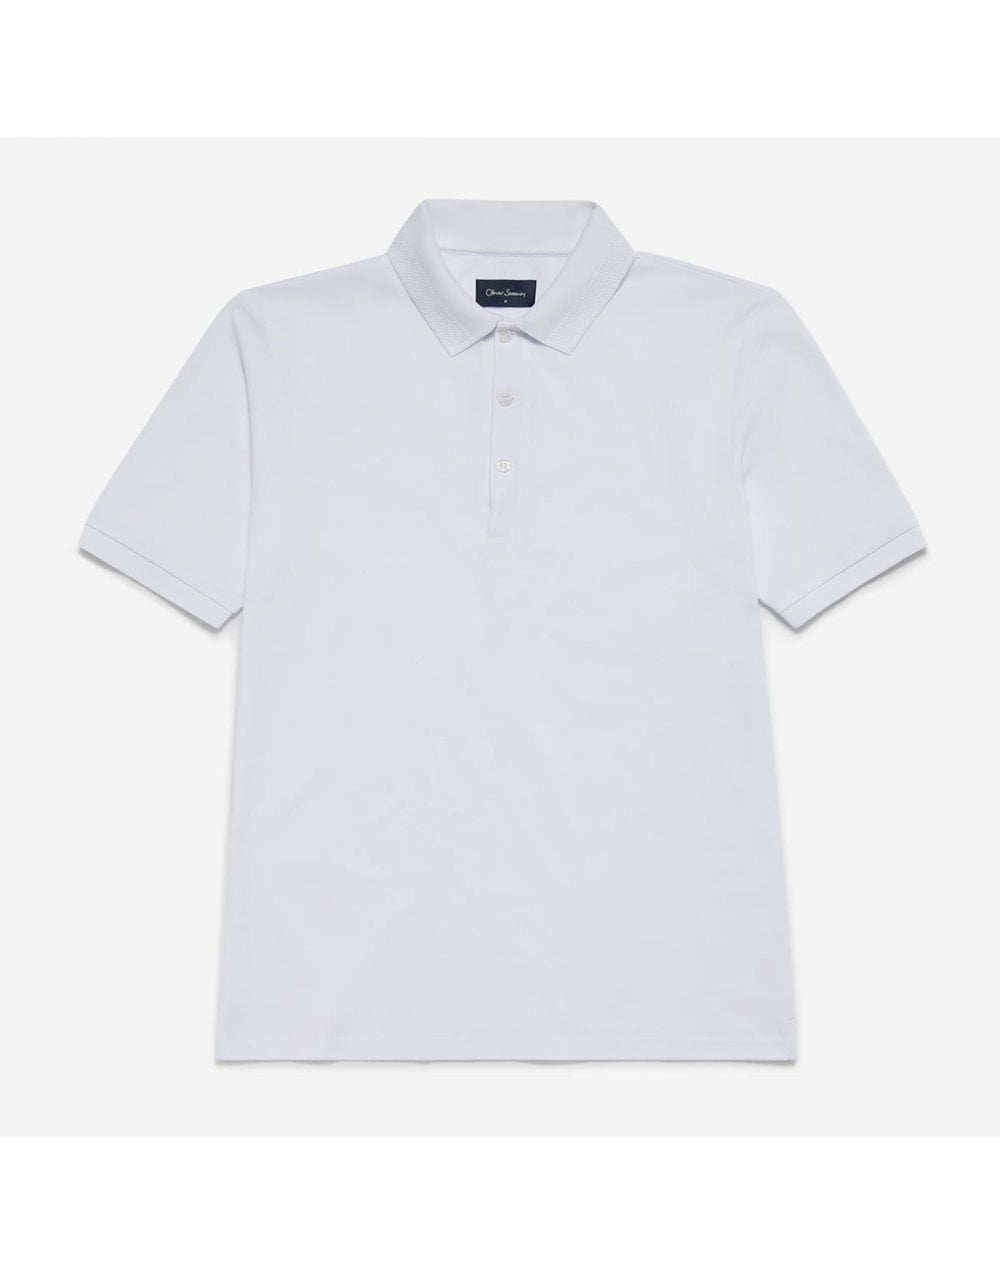 Oliver Sweeney Oliver Sweeney Tralee Perforated Collar Detail Polo Shirt Size: M, Col